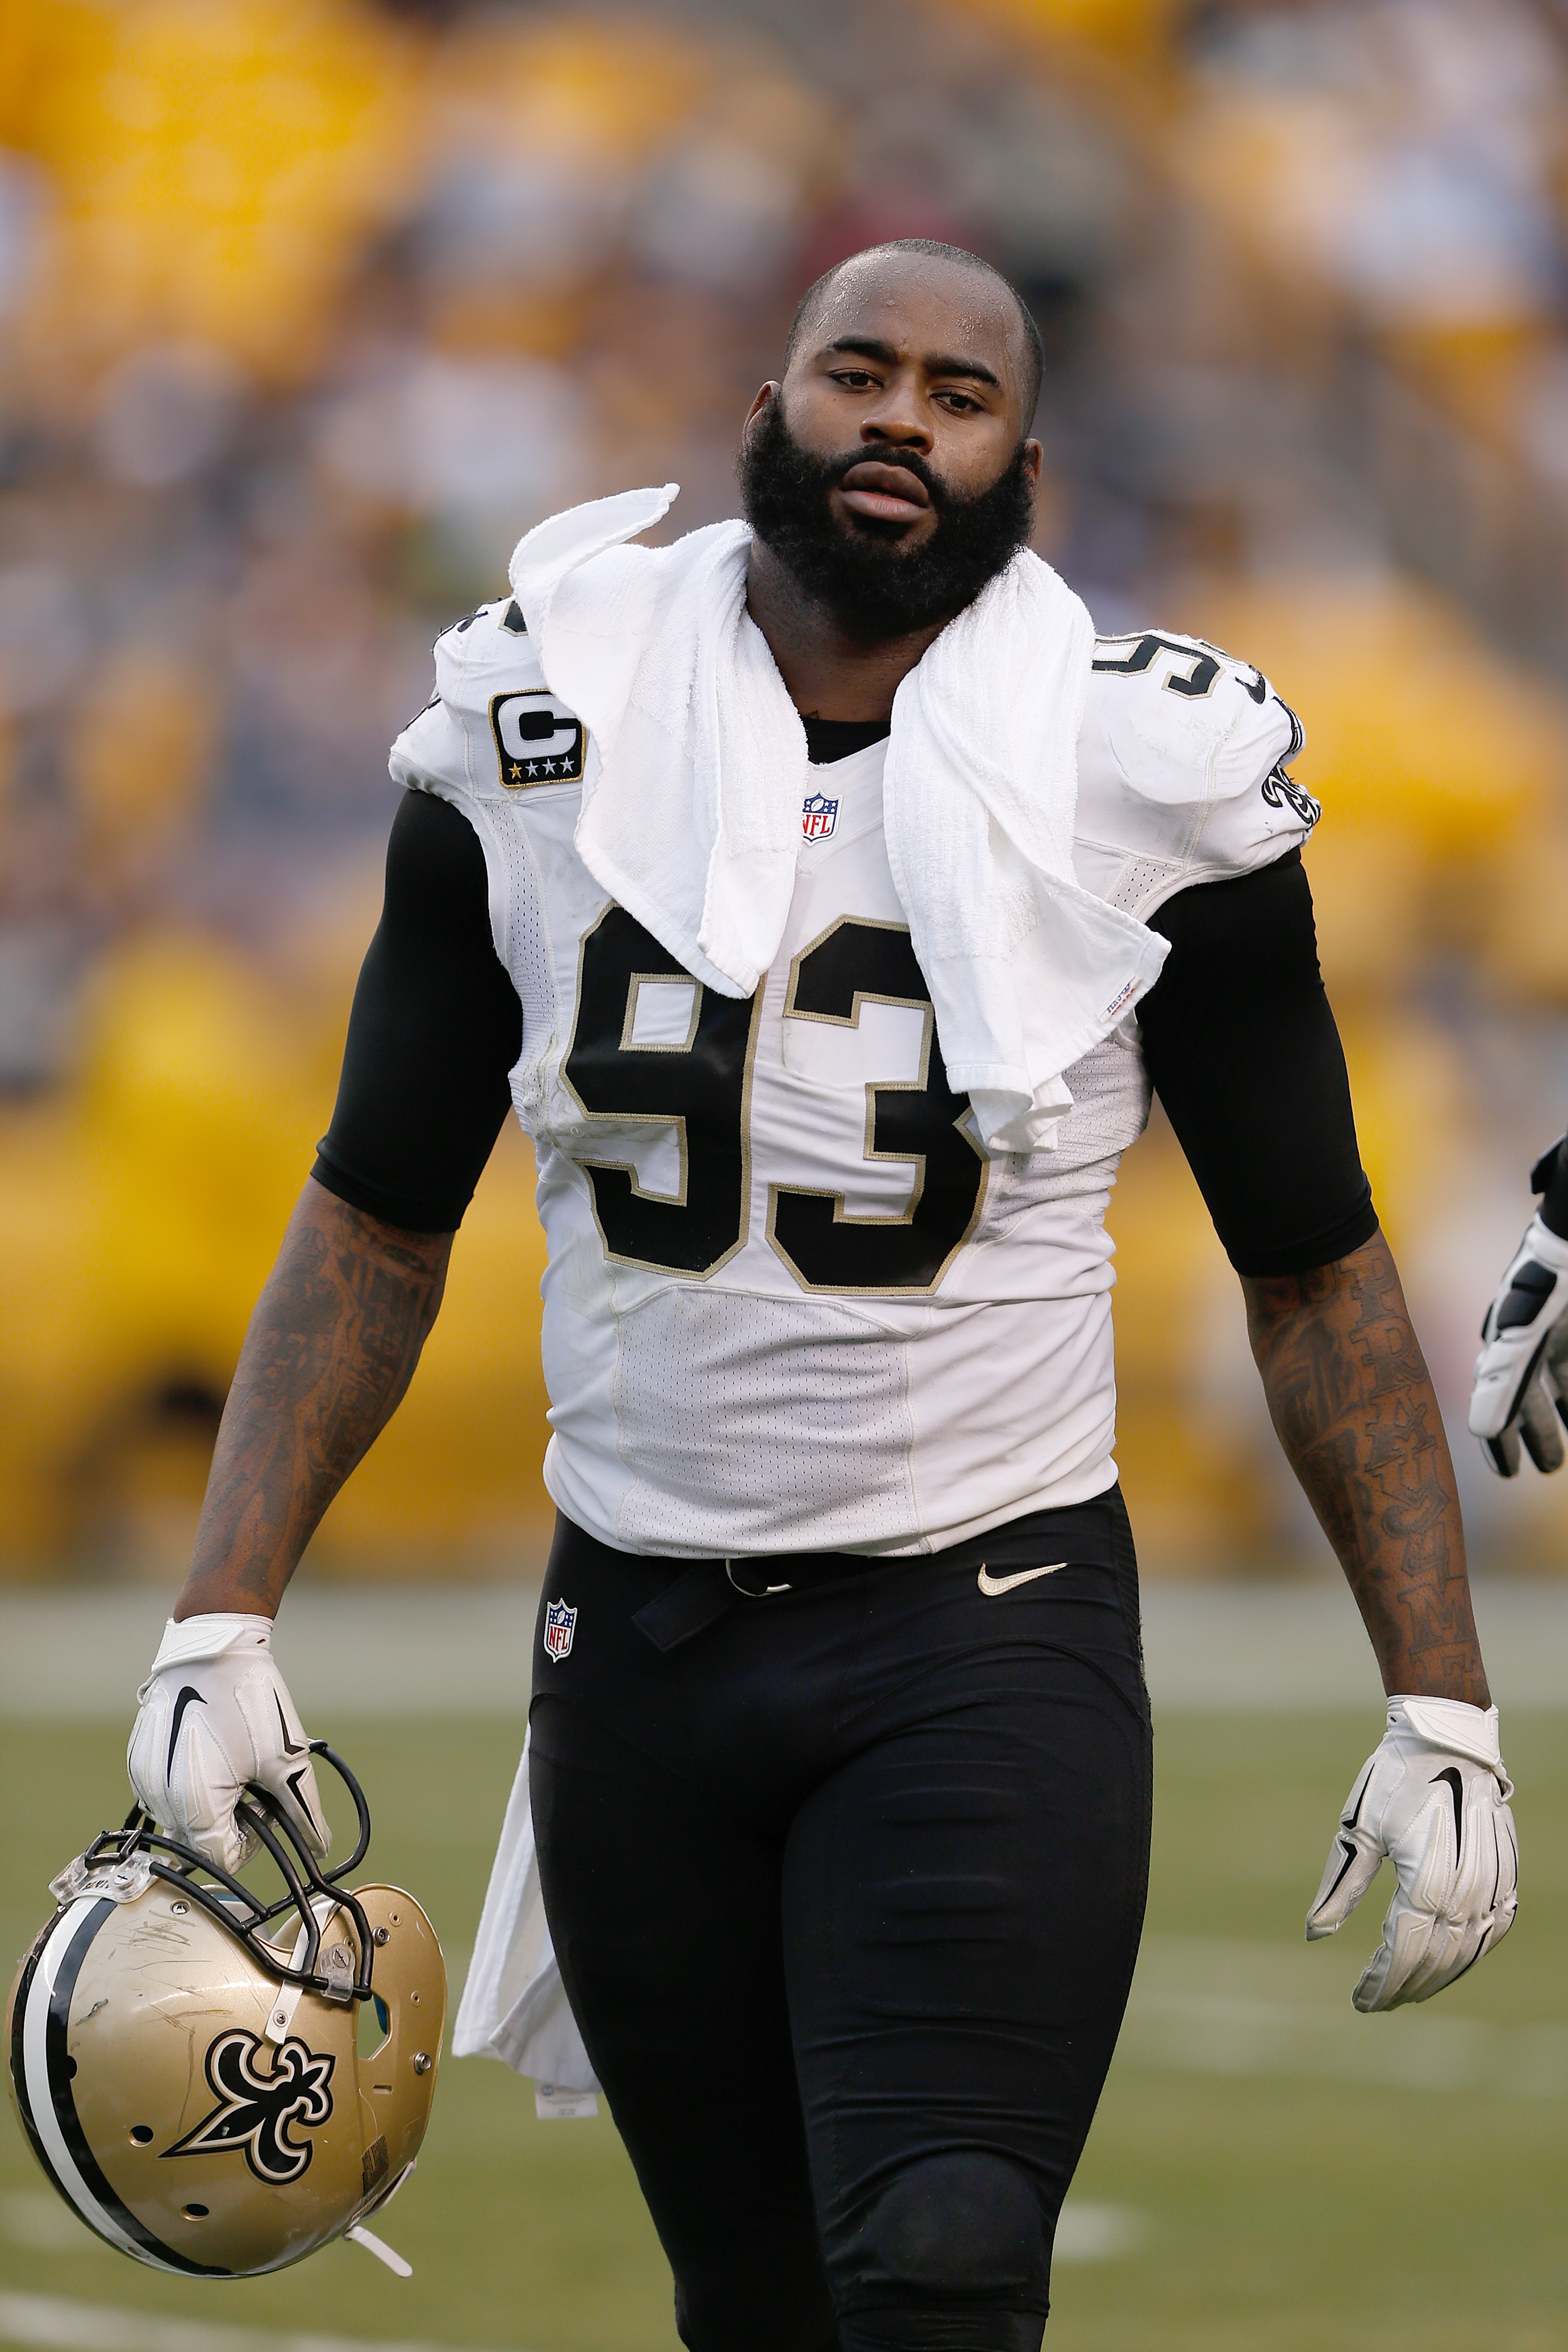 New Orleans Saints linebacker Junior Galette at the game against the Pittsburgh Steelers in Pittsburgh, Pa. on Nov. 30, 2014. (Scott Boehm—AP)